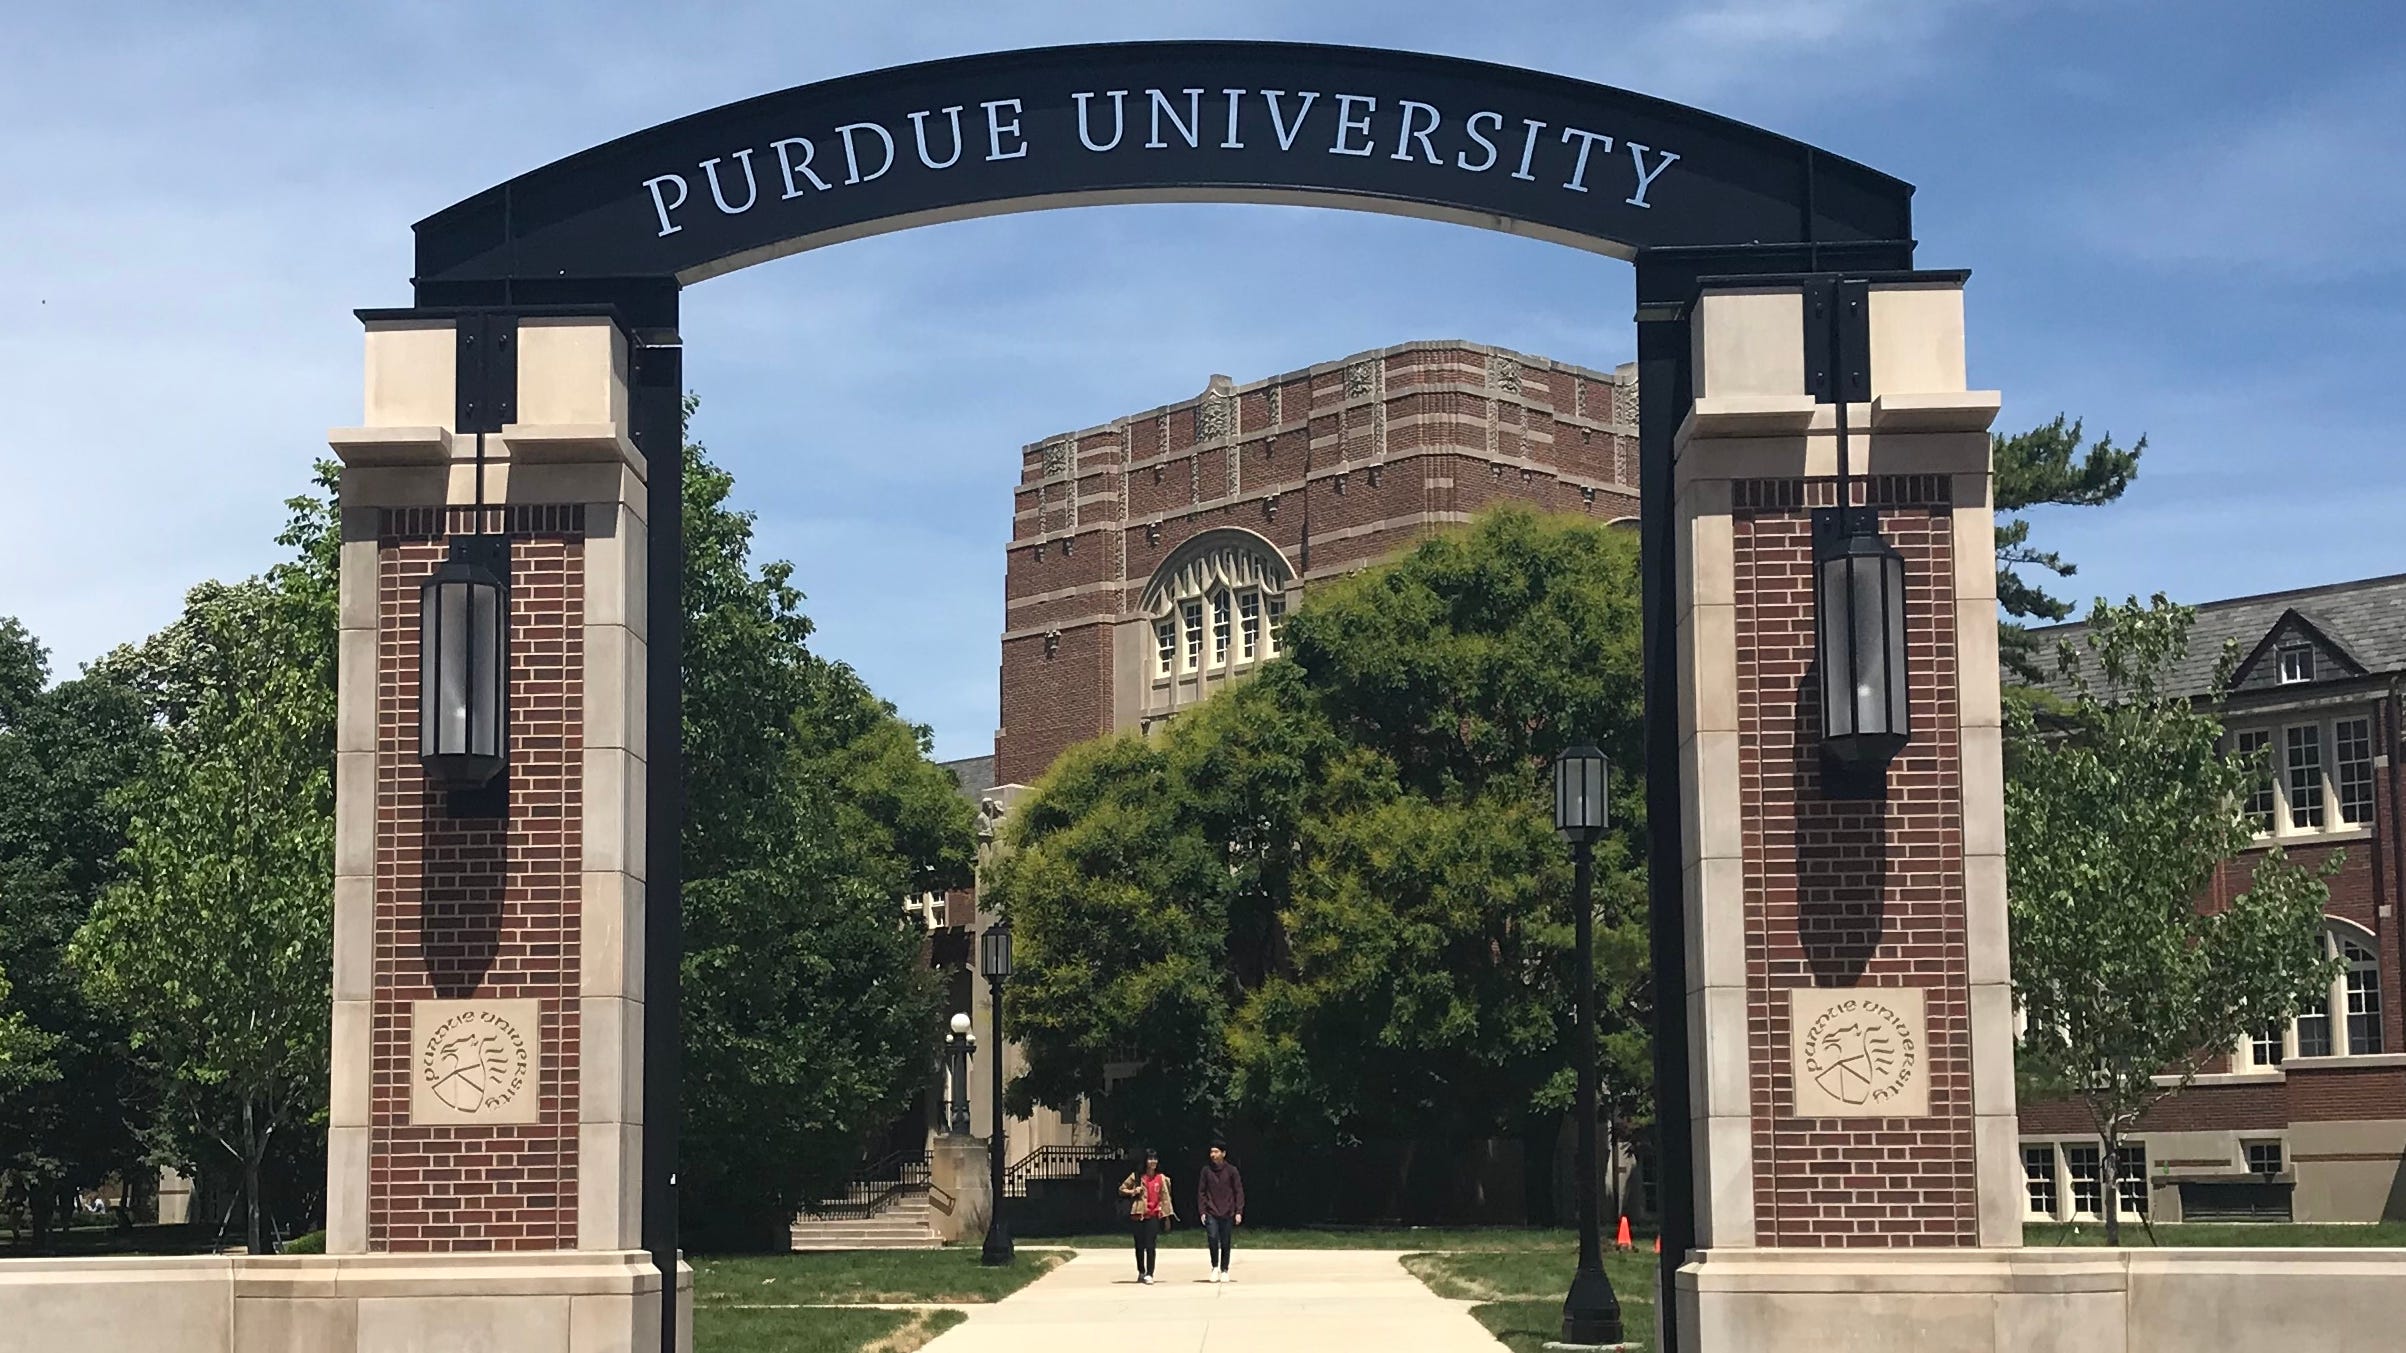 Purdue Online partnership offers master's degrees in engineering